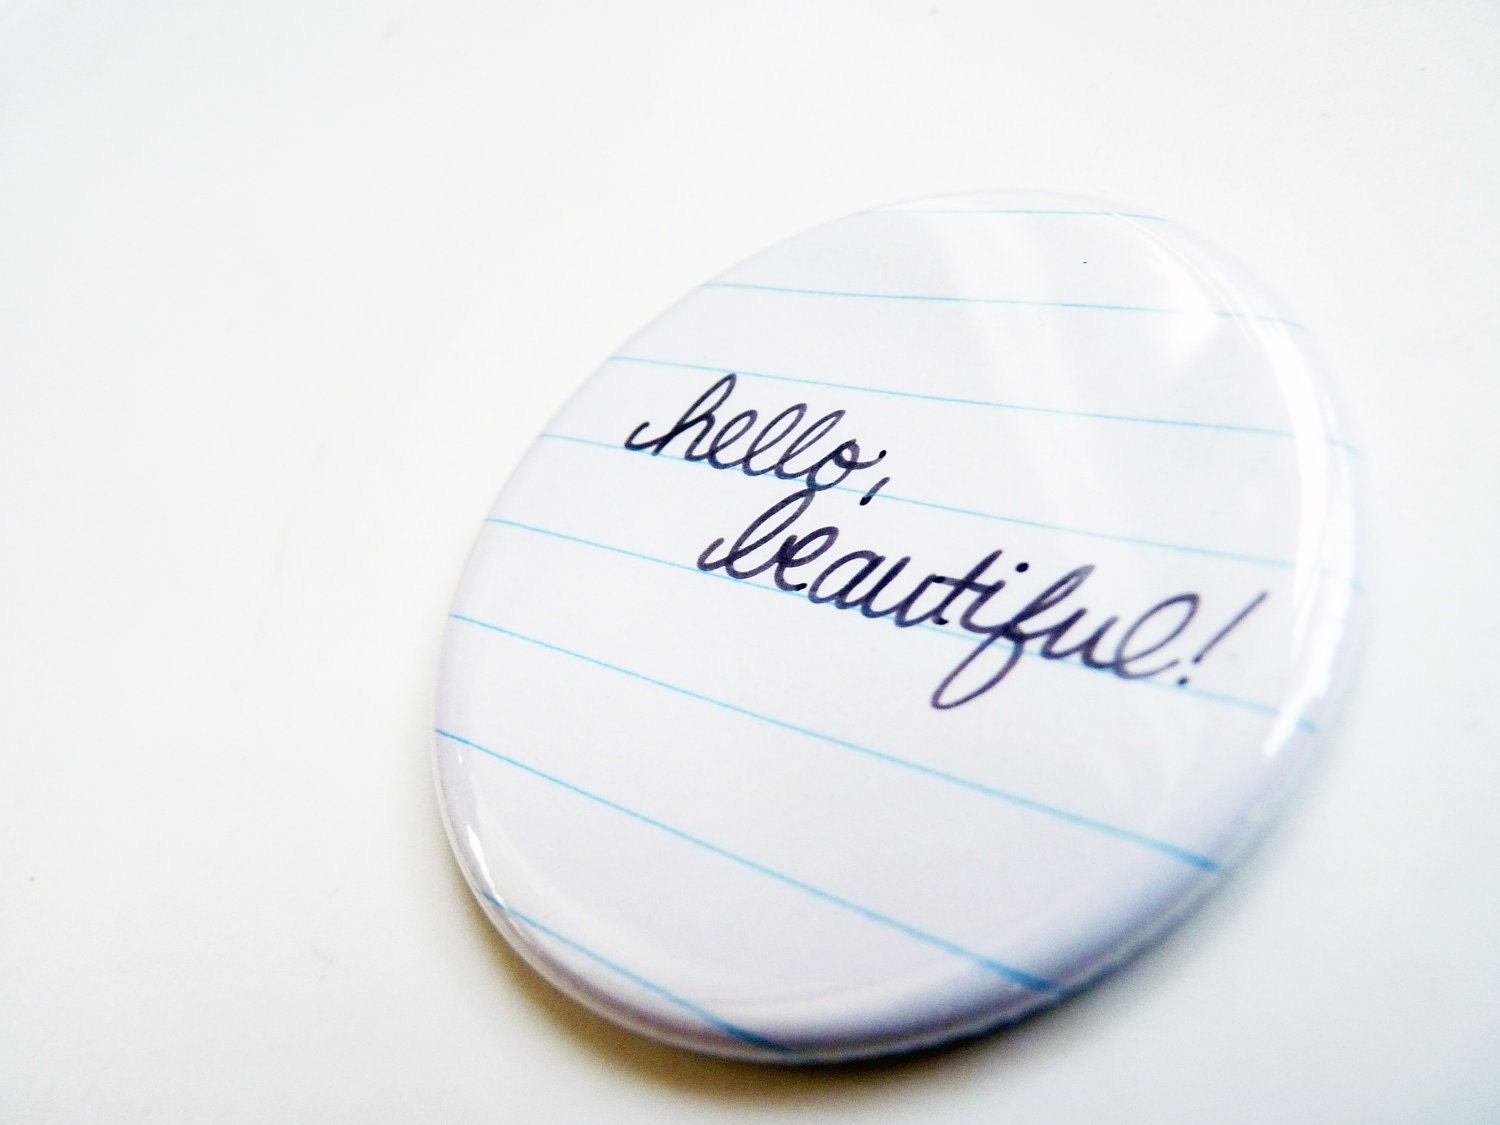 Hello Beautiful - Pocket Mirror - Great for Valentine's Day, Bridesmaid Gift, Under 5 Gift, Party Favors